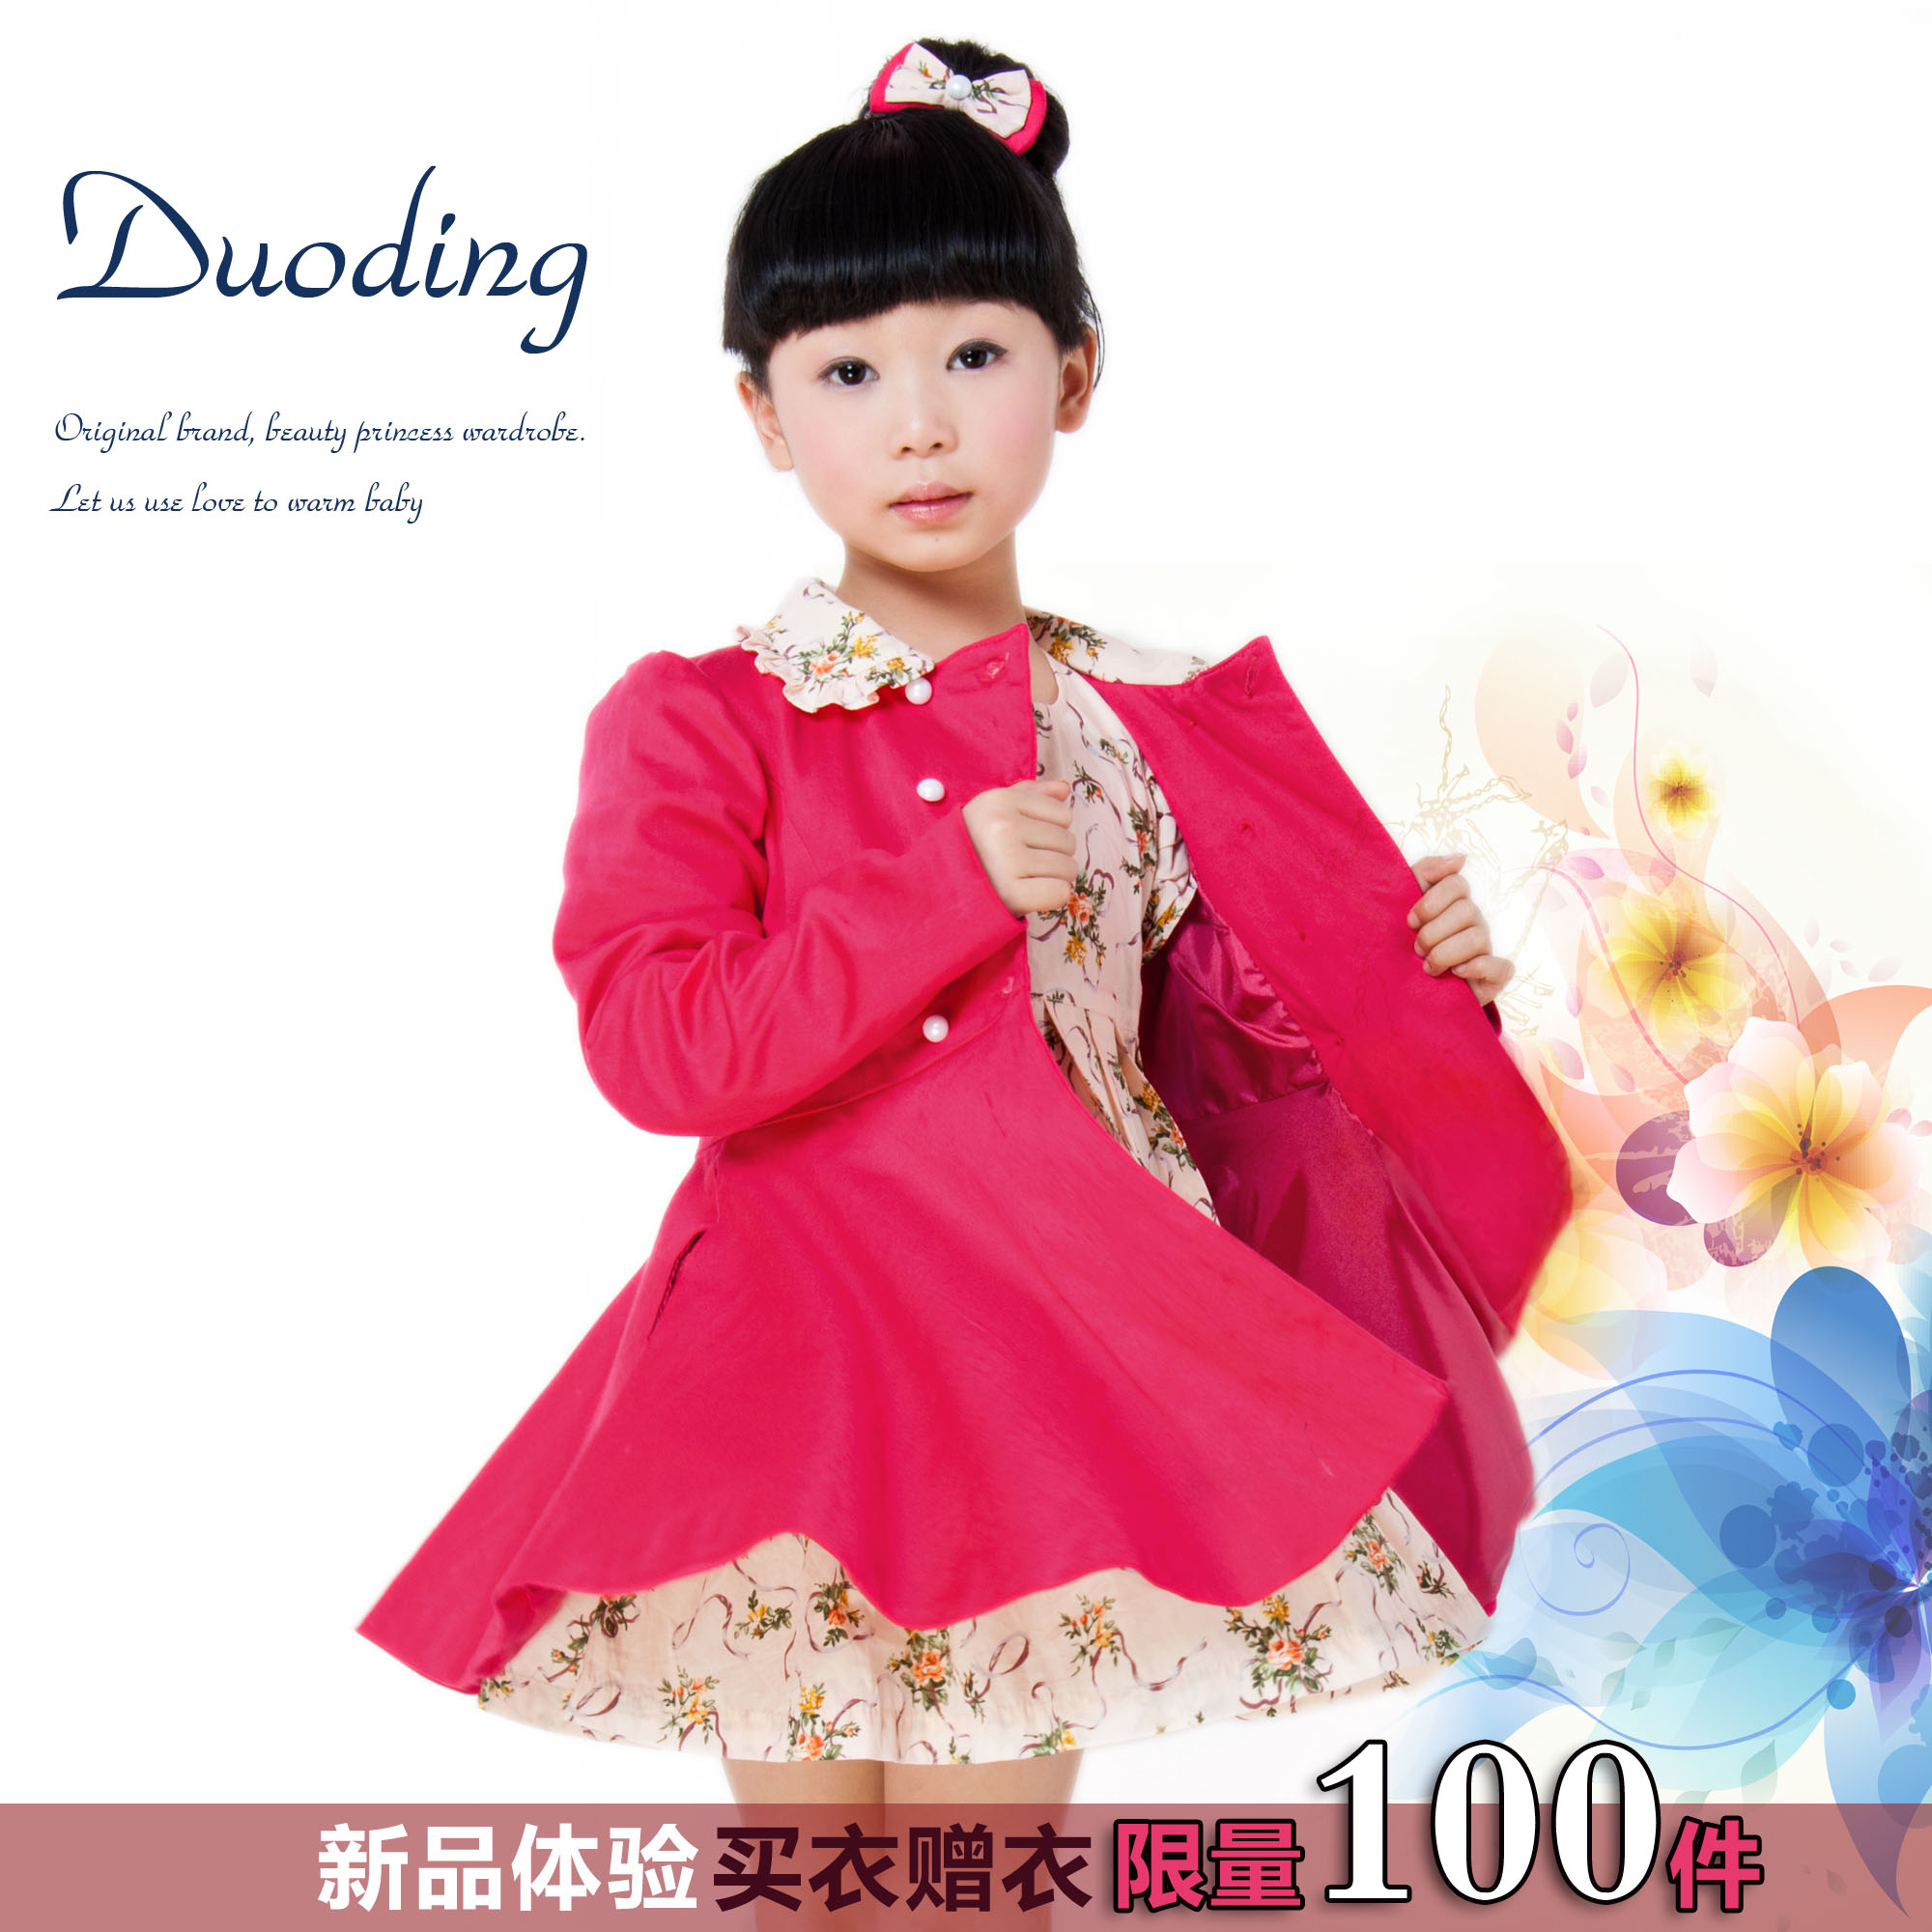 Female child outerwear 2013 spring children's clothing small big boy trench child cardigan long outerwear